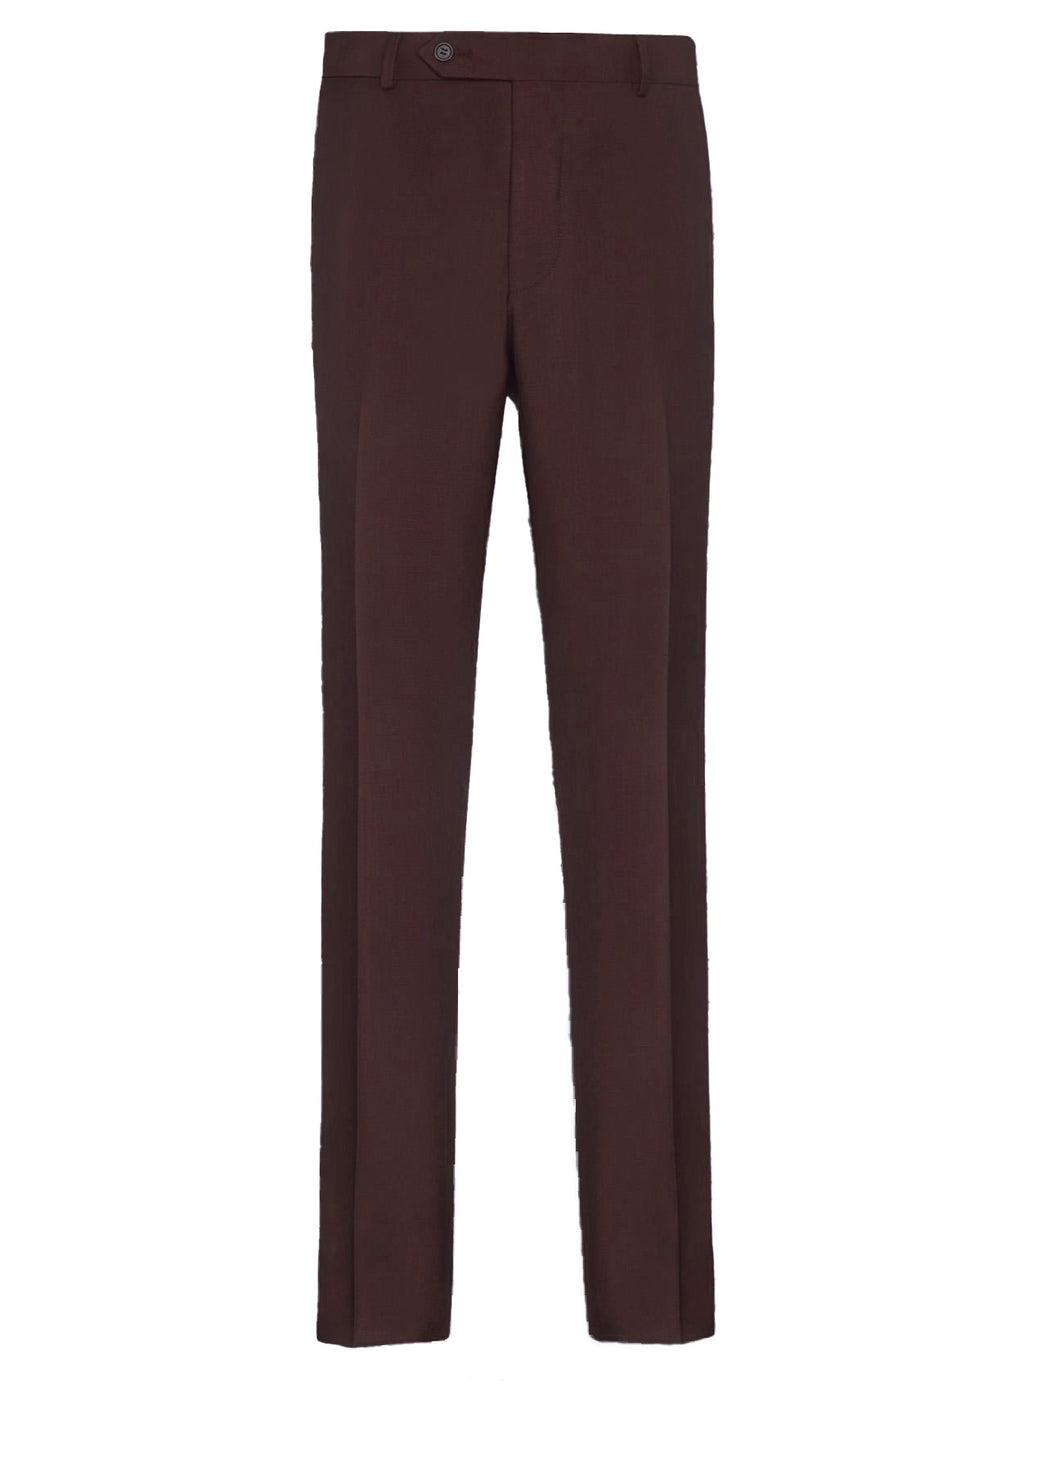 Men's | Giorgio Fiorelli | G47815-8 | No Pleat Poly-Rayon Suit Pant | Solid Brown